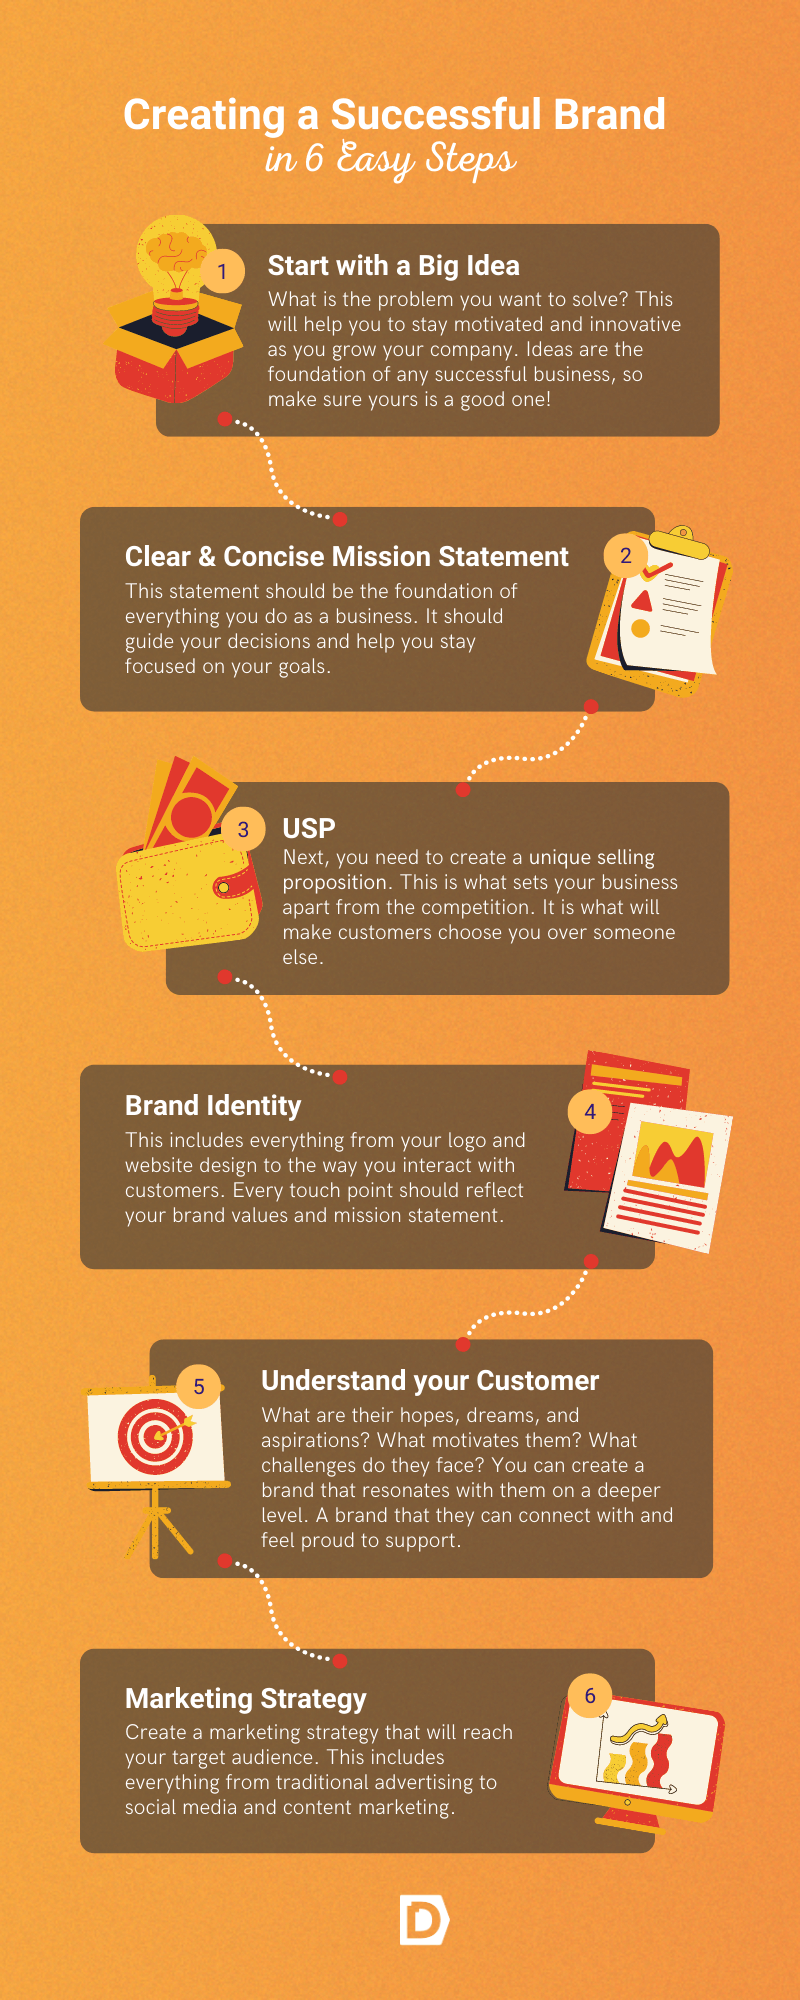 An infographic of 6 steps to creating a successful brand